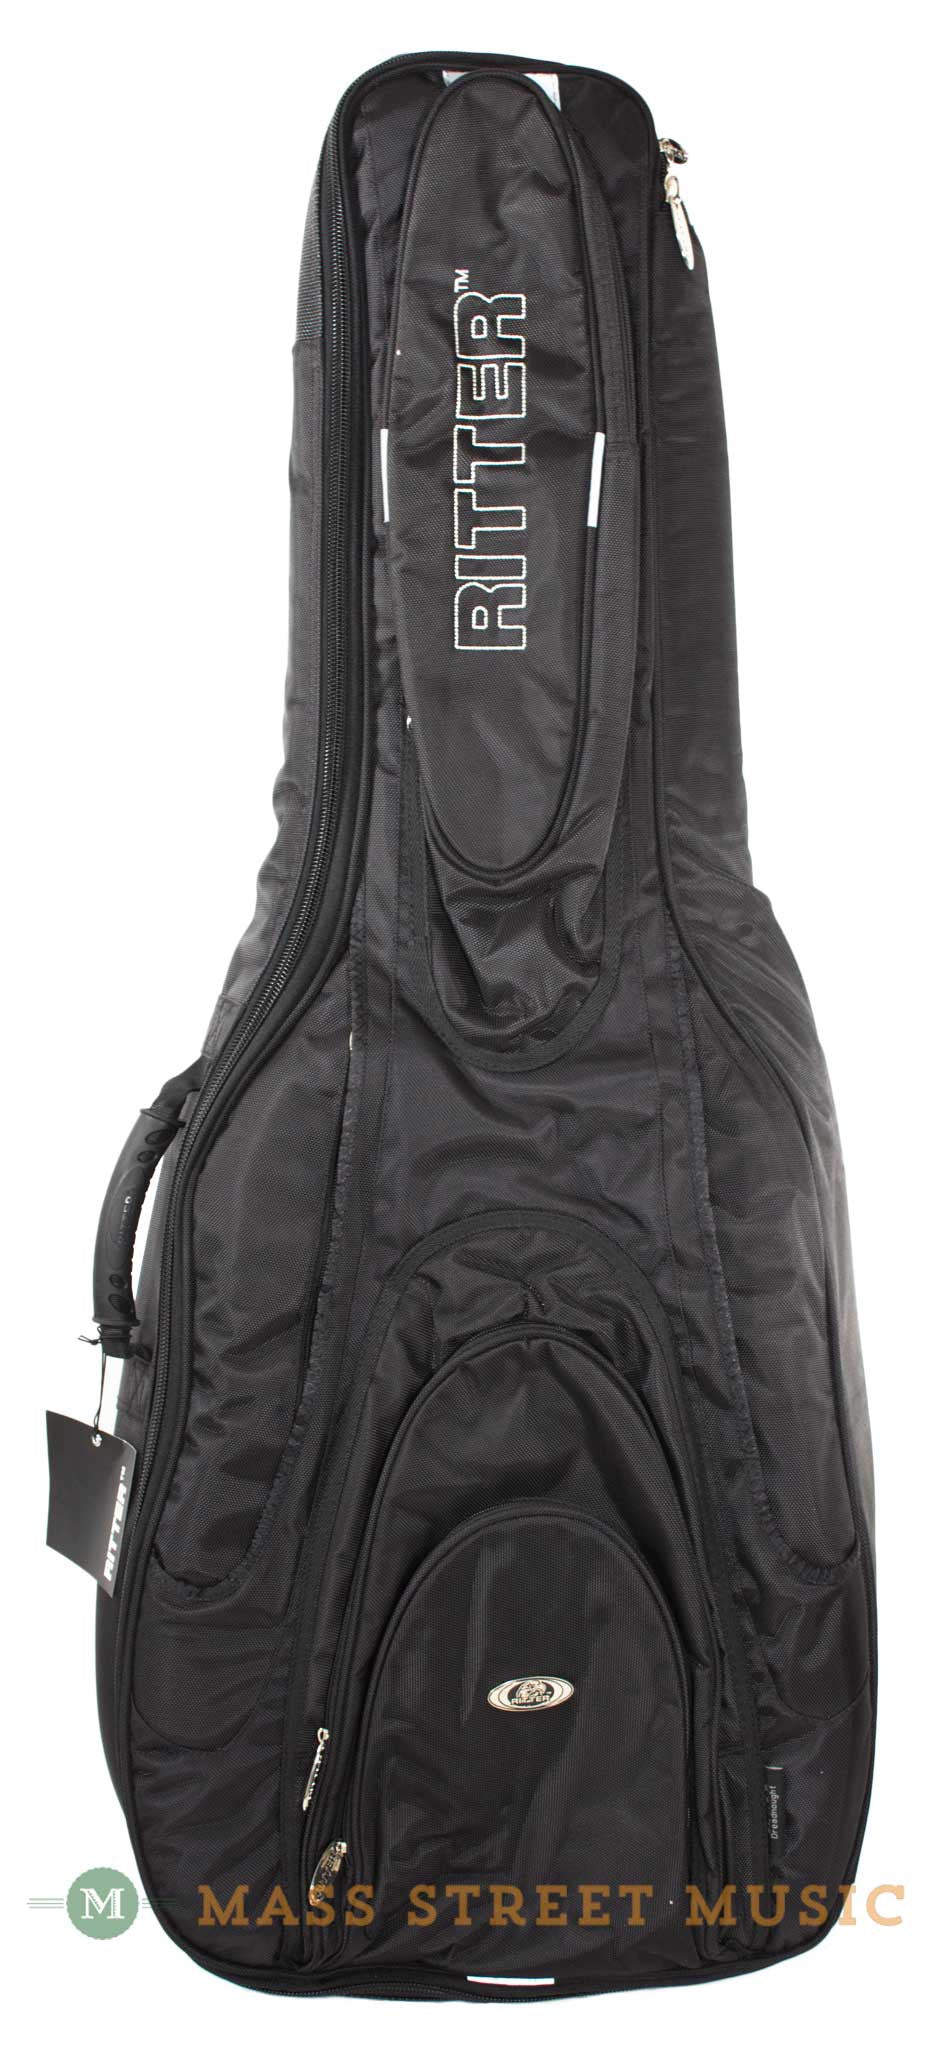 Ritter Acoustic Guitar Bag - style 3 with backpack straps Mass Street